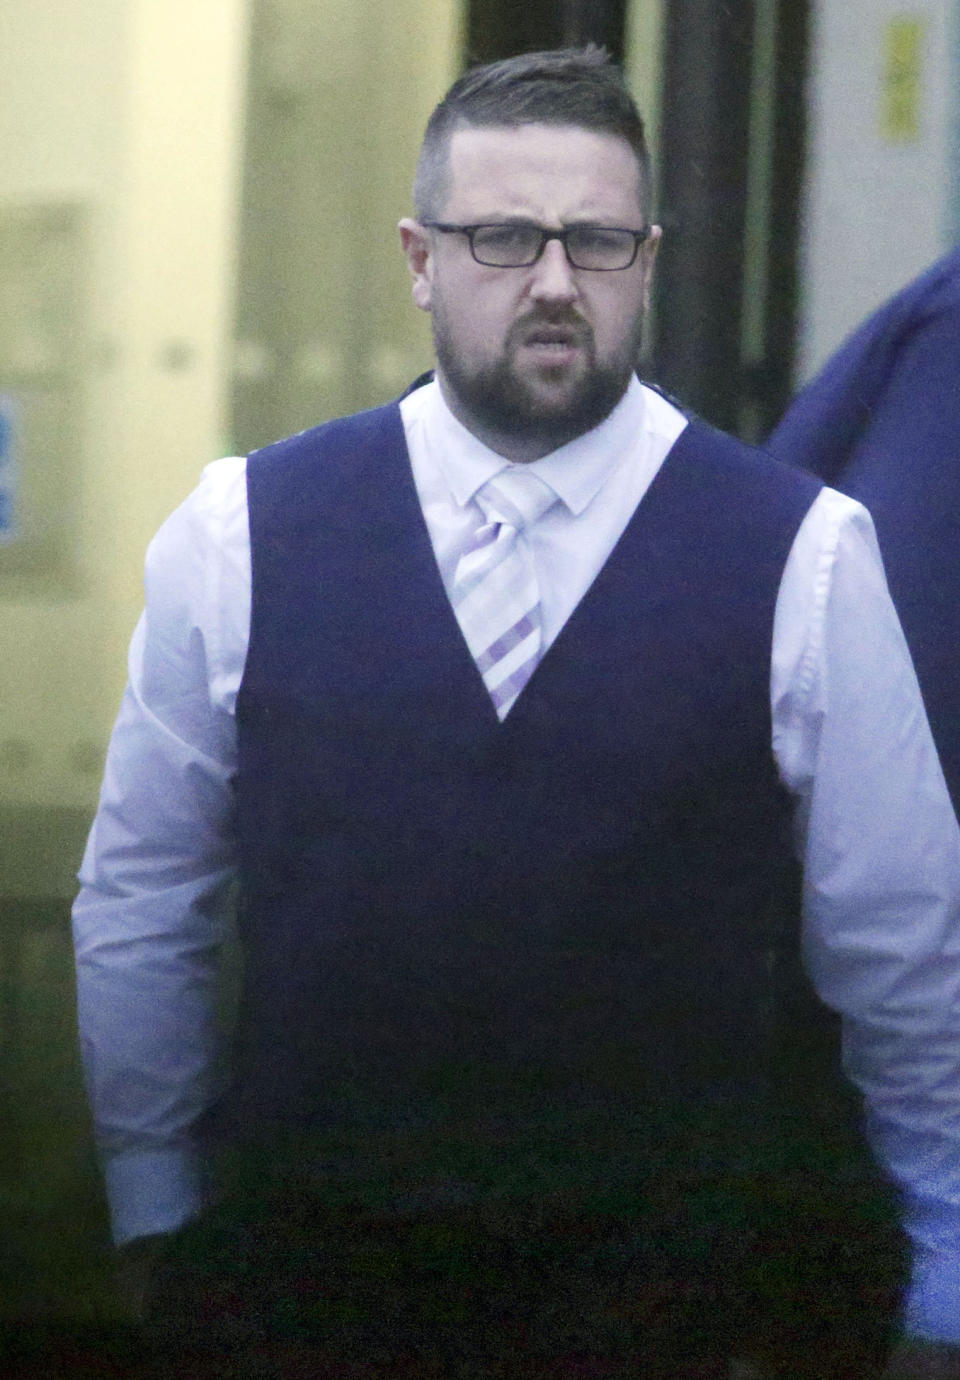 Tomos Rhydian Wilson pictured outside Aberystwyth Court, December 10 2019 (Picture: SWNS)